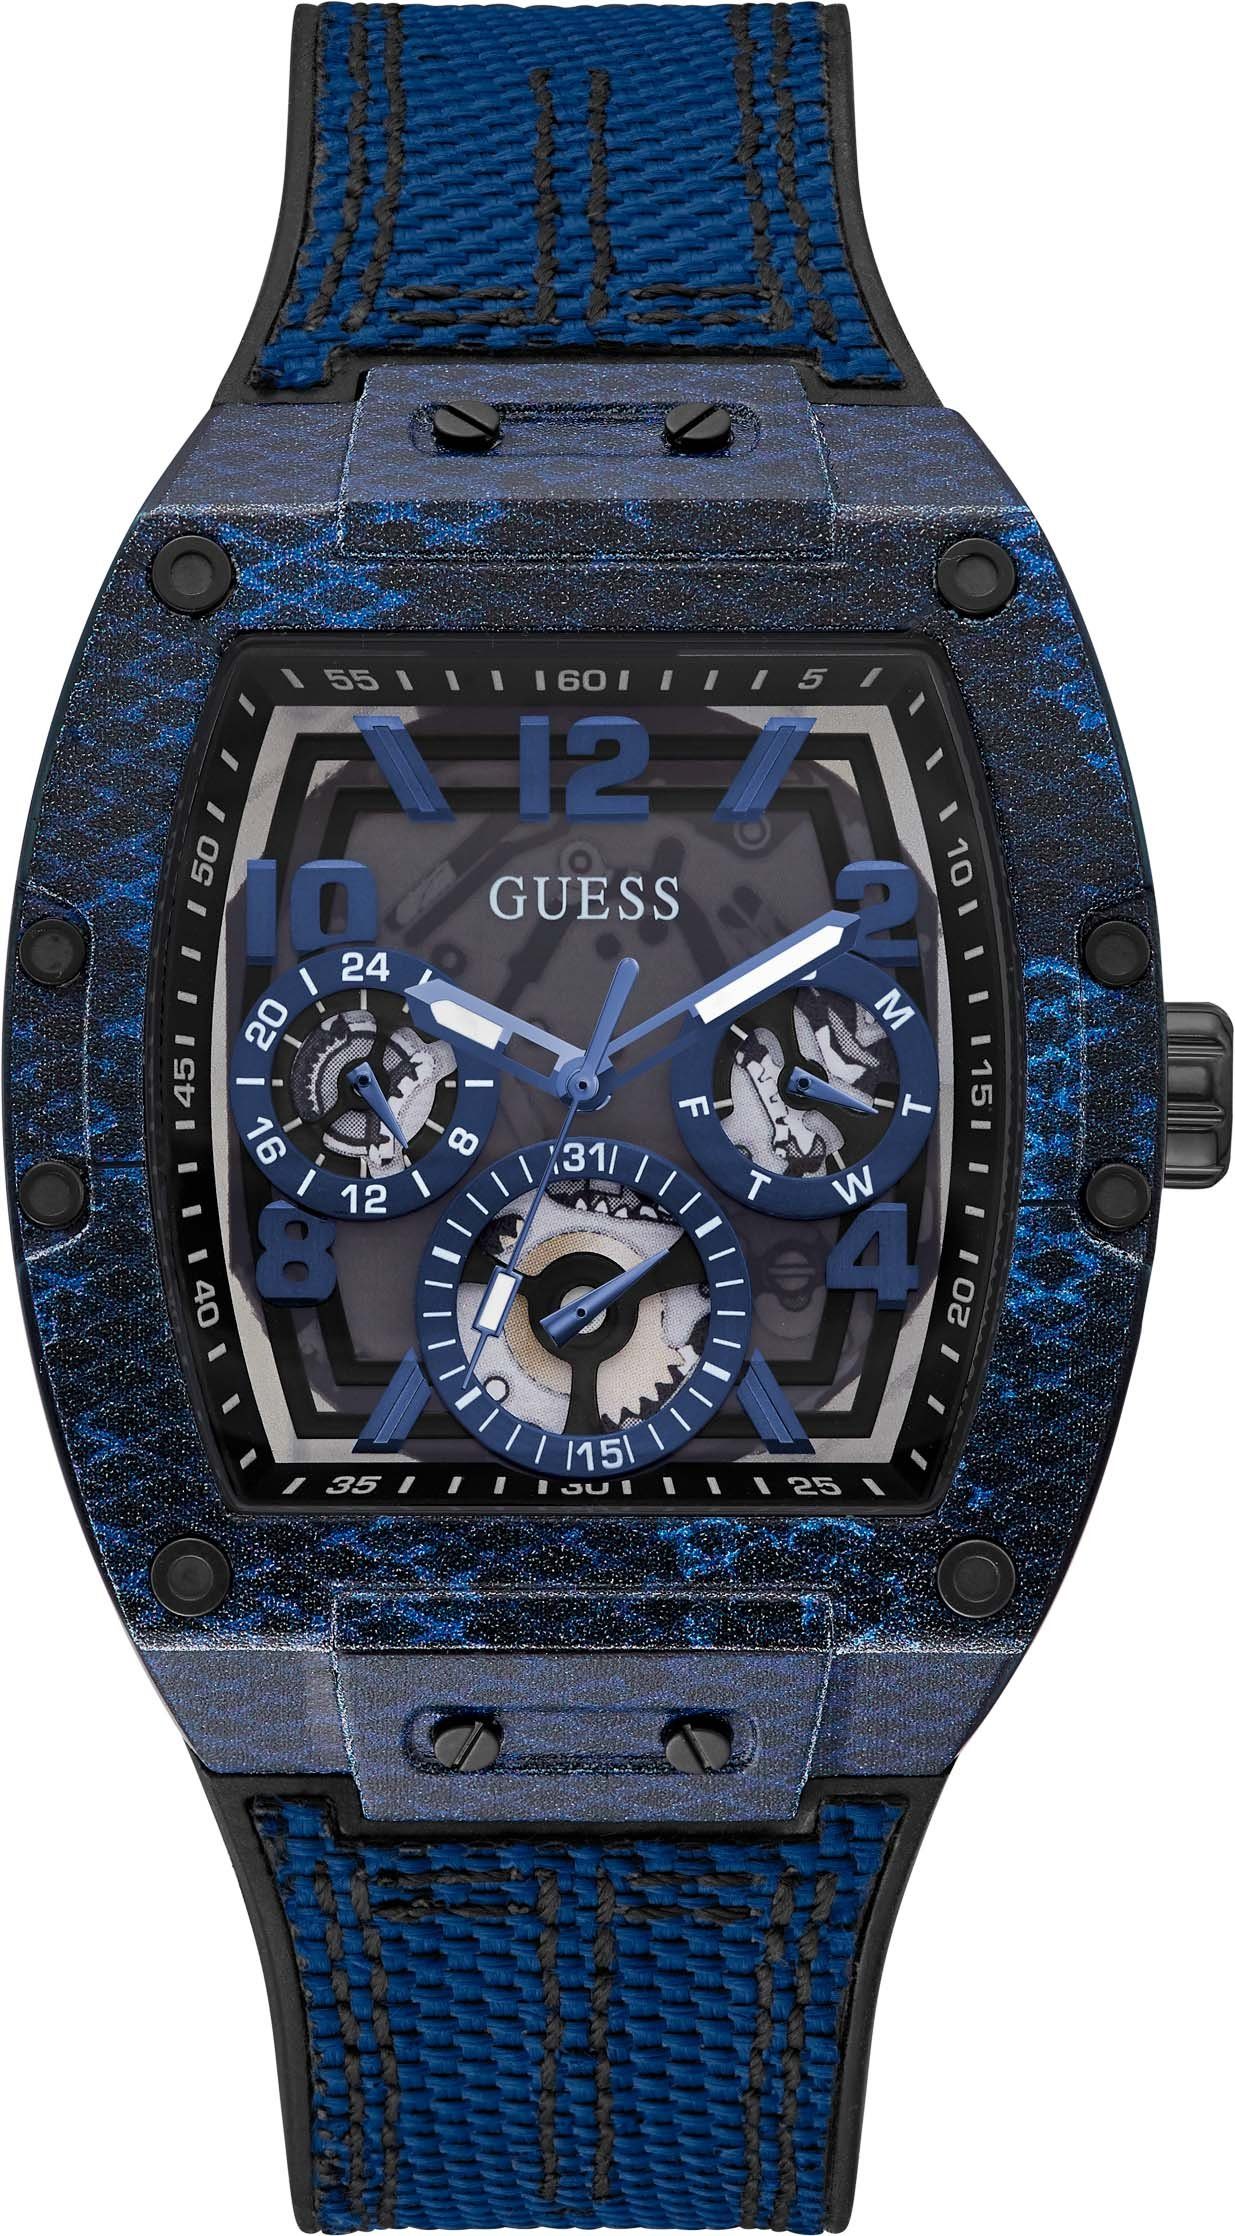 GW0422G1 Multifunktionsuhr Guess